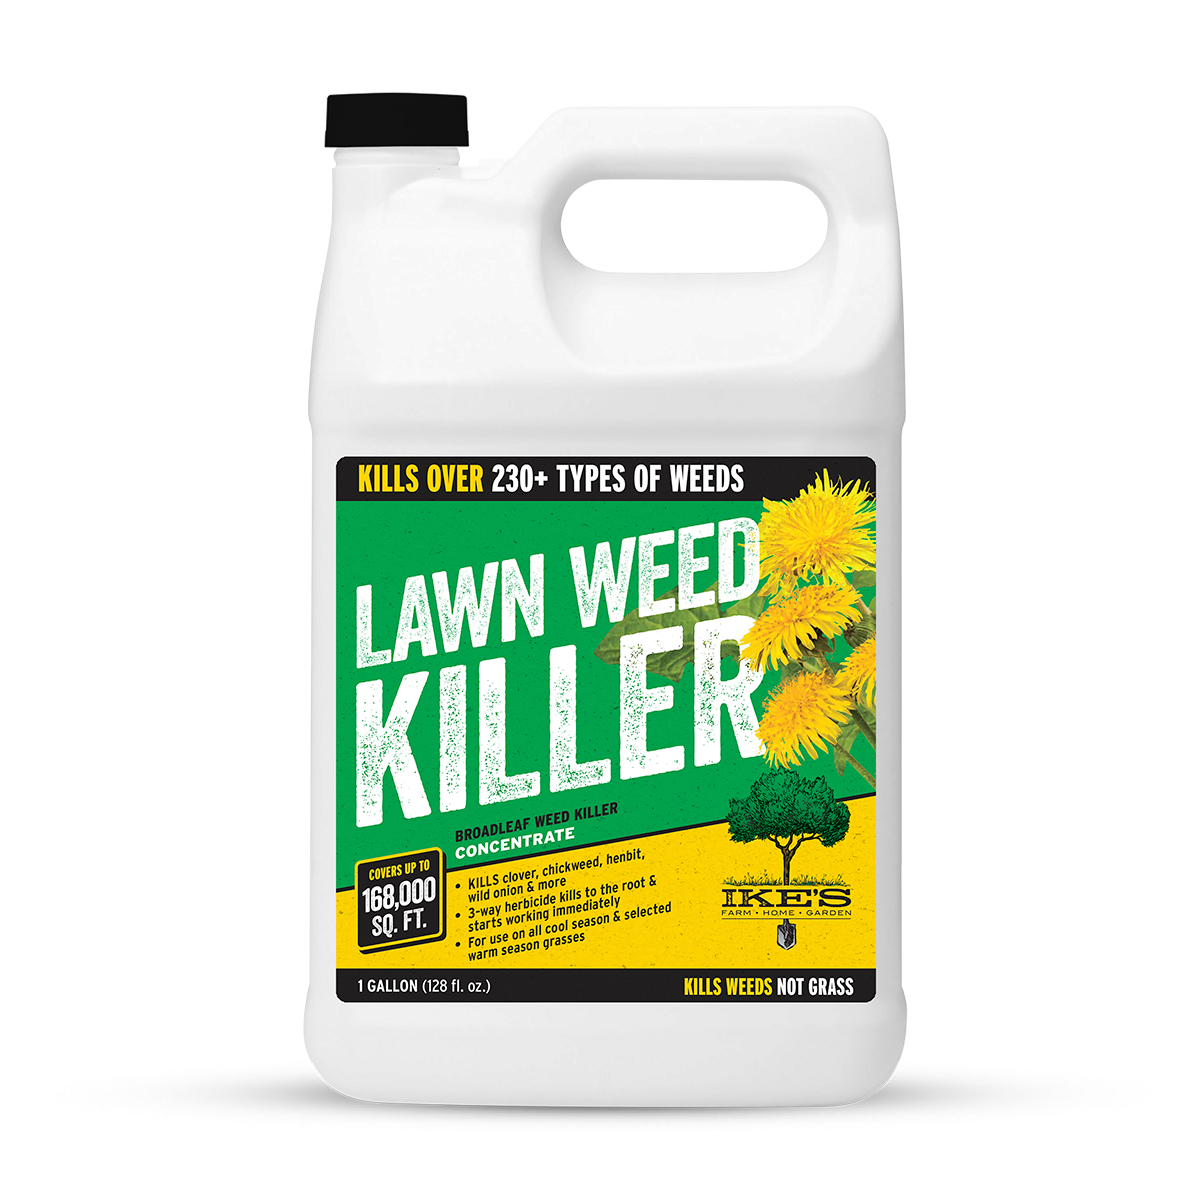 container of IKE'S Lawn Weed Killer concentrate